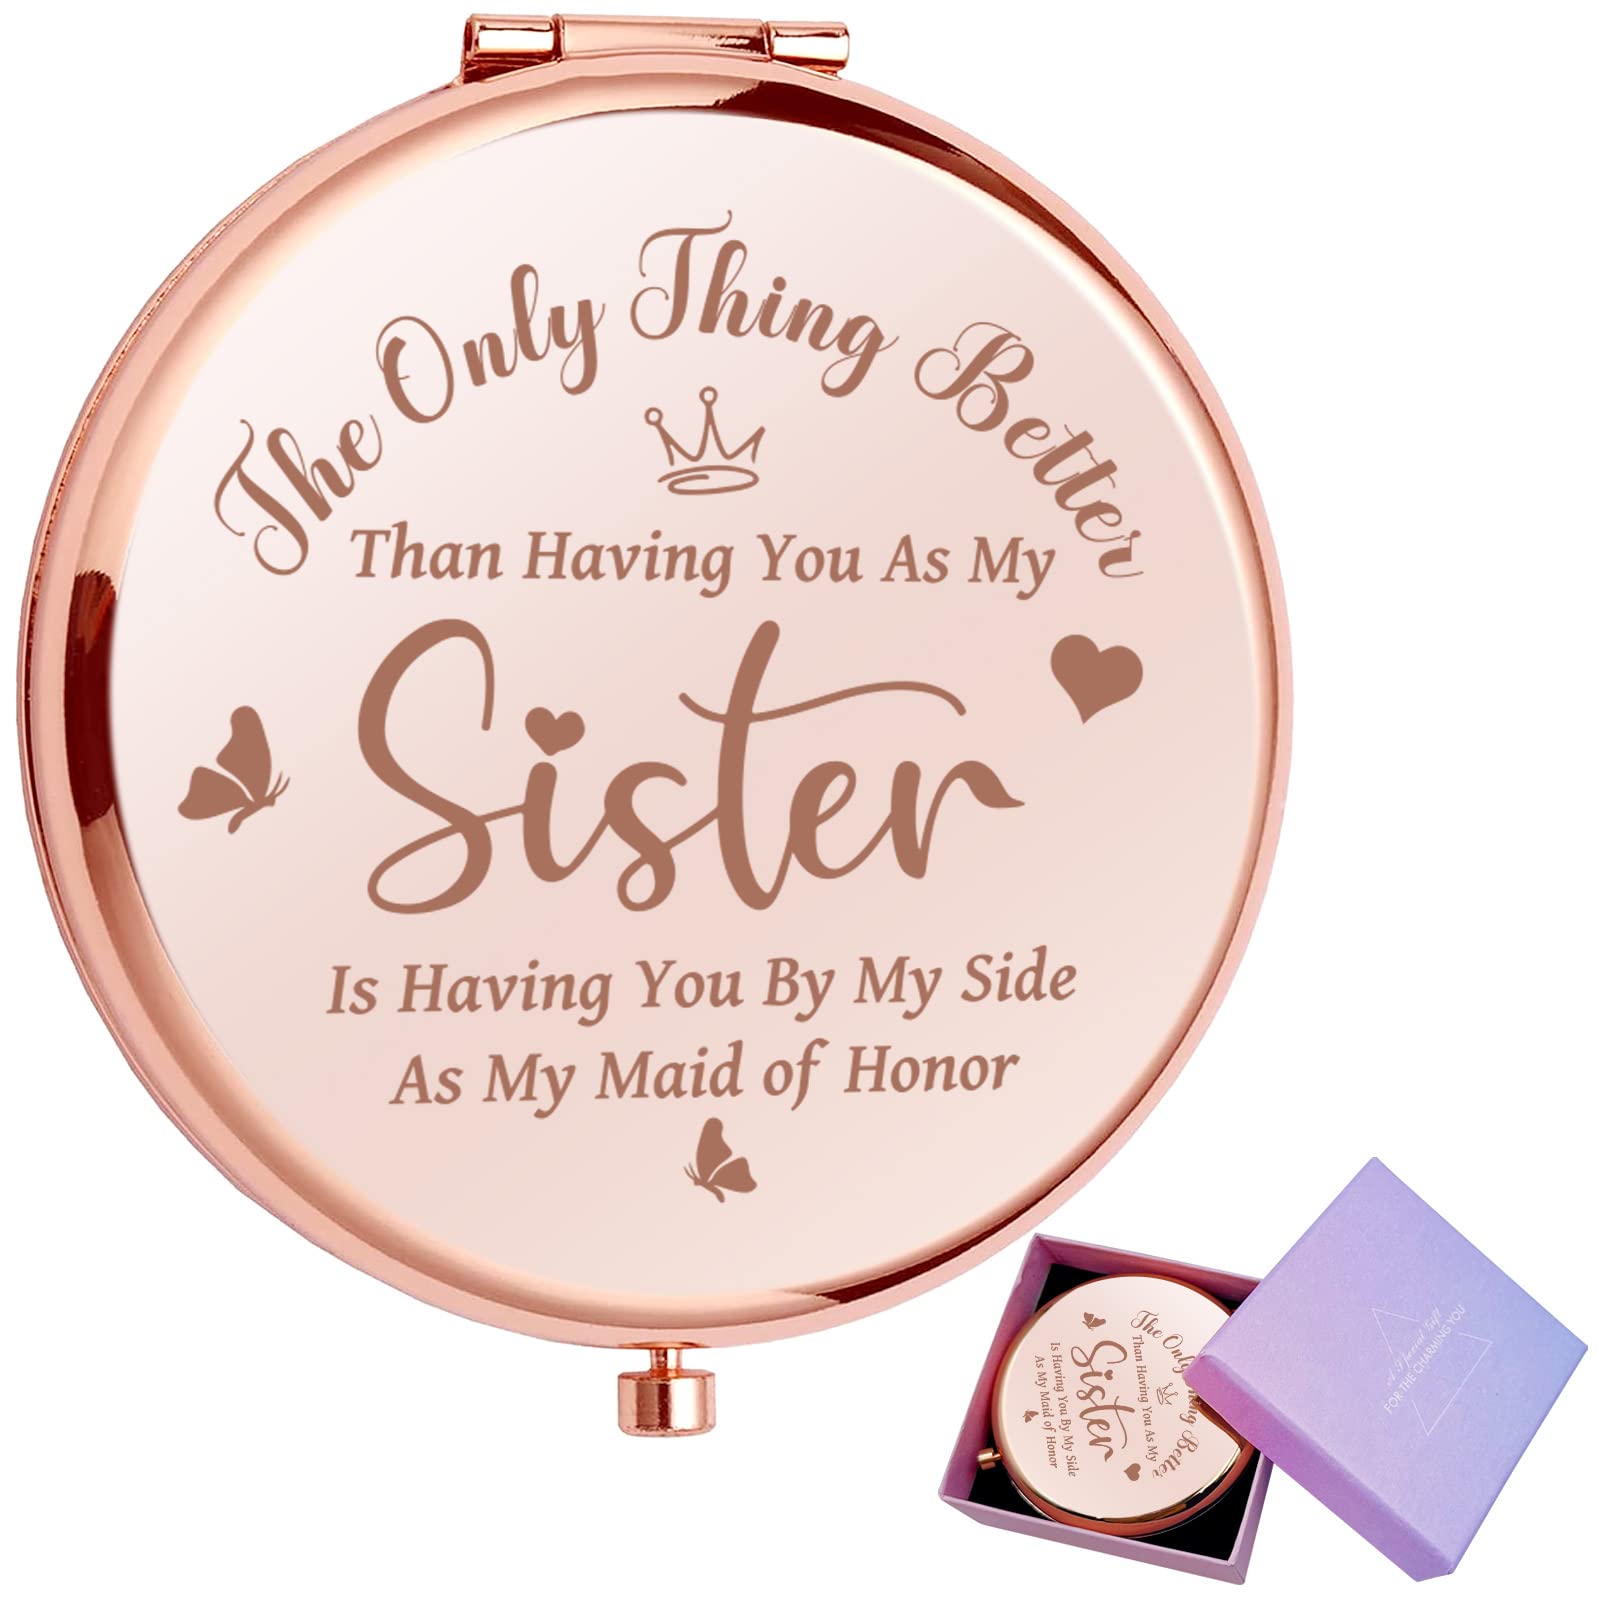 20 Best Wedding Gifts for Sisters from Brothers - EverAfterGuide